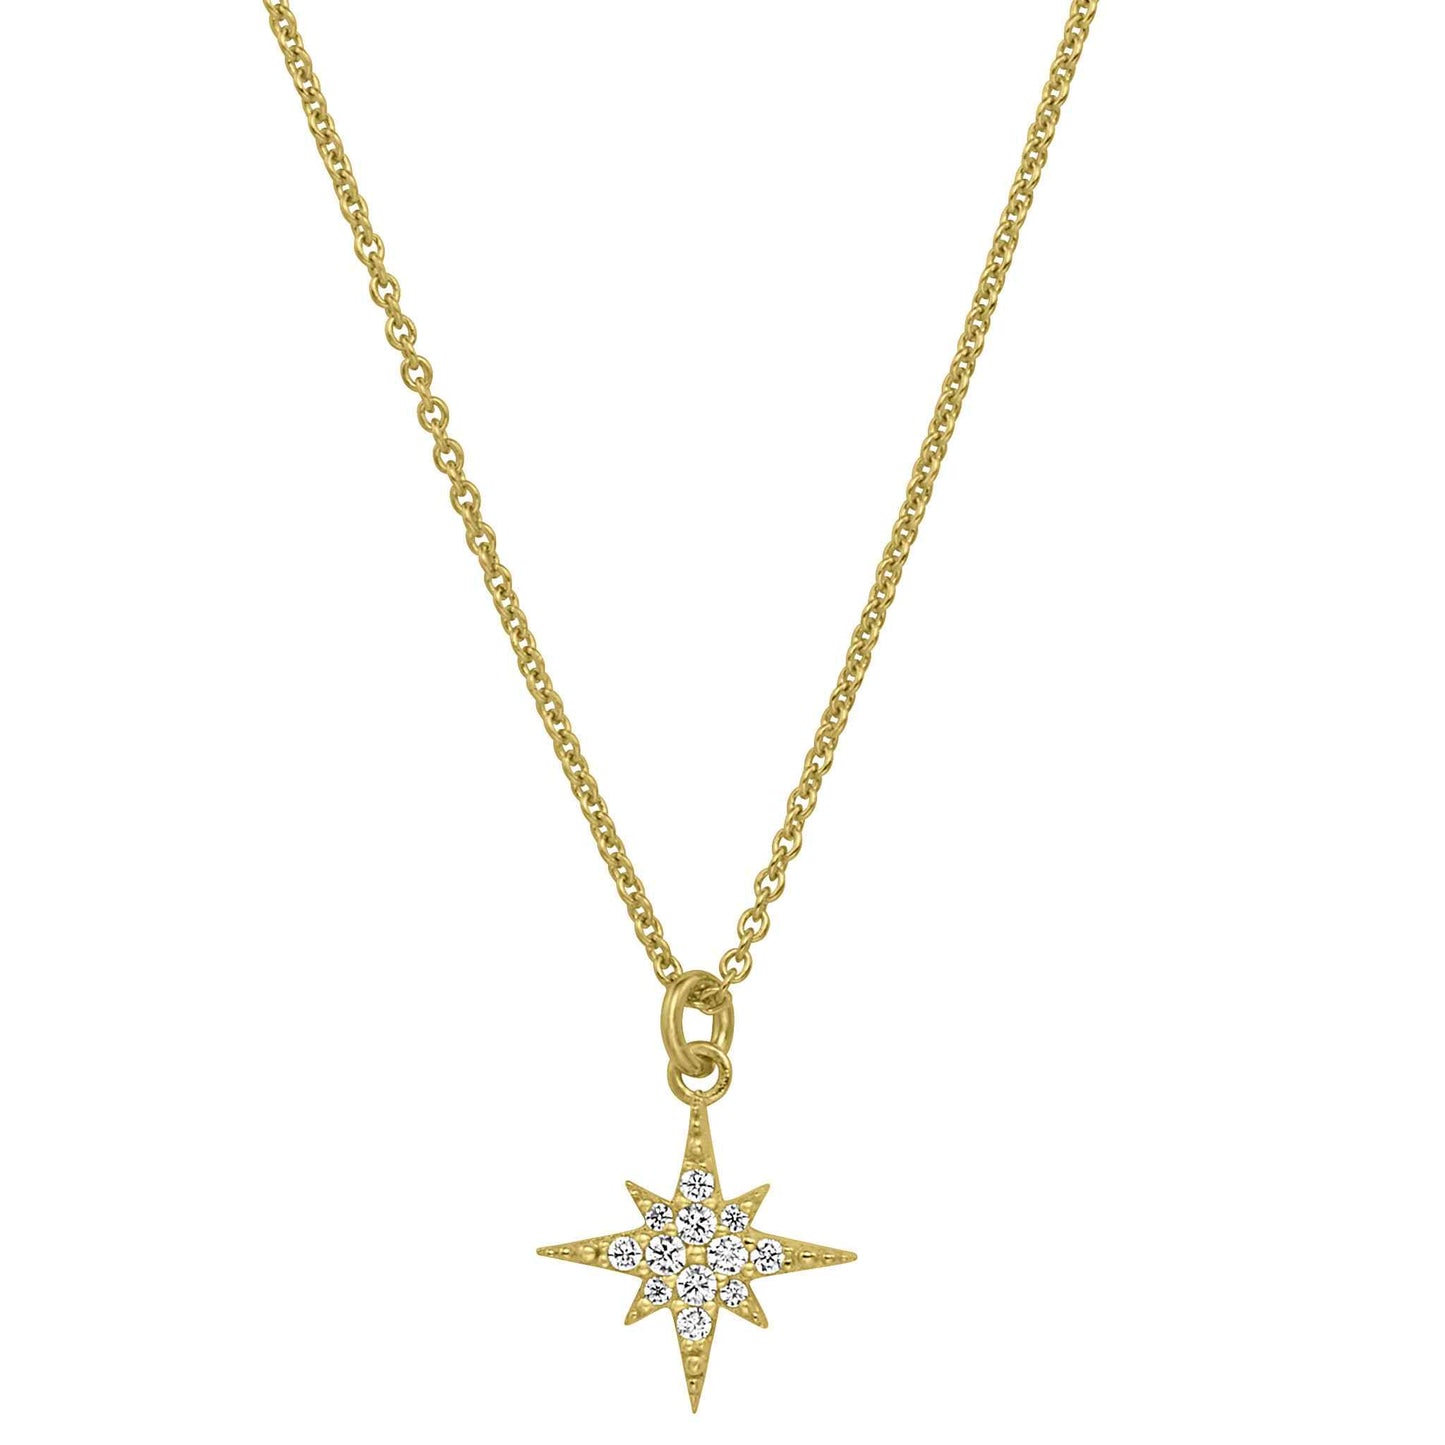 A sterling silver starburst necklace with simulated diamonds displayed on a neutral white background.